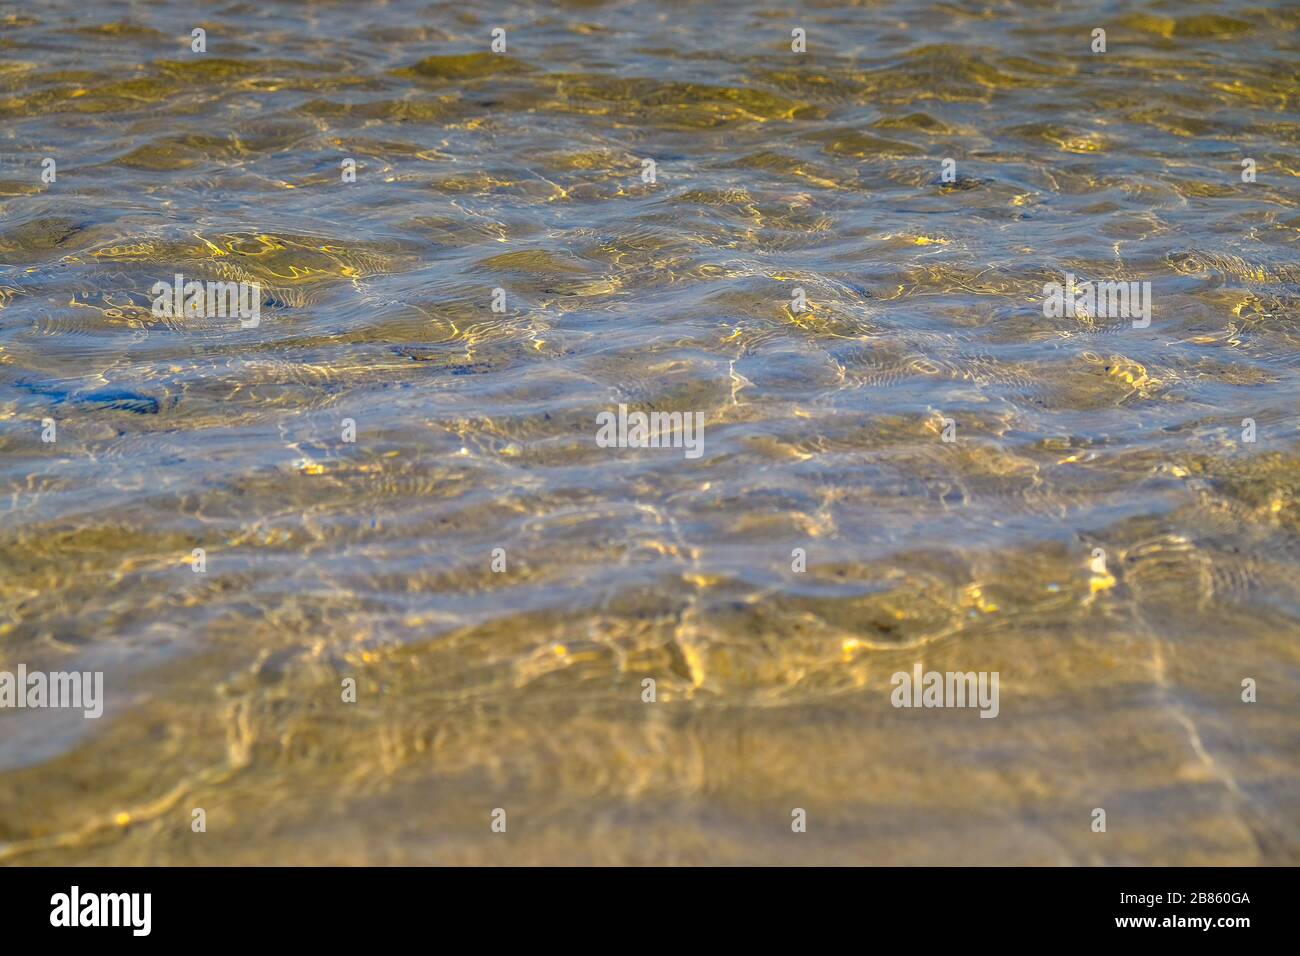 low shot of rippling water over golden sand Stock Photo